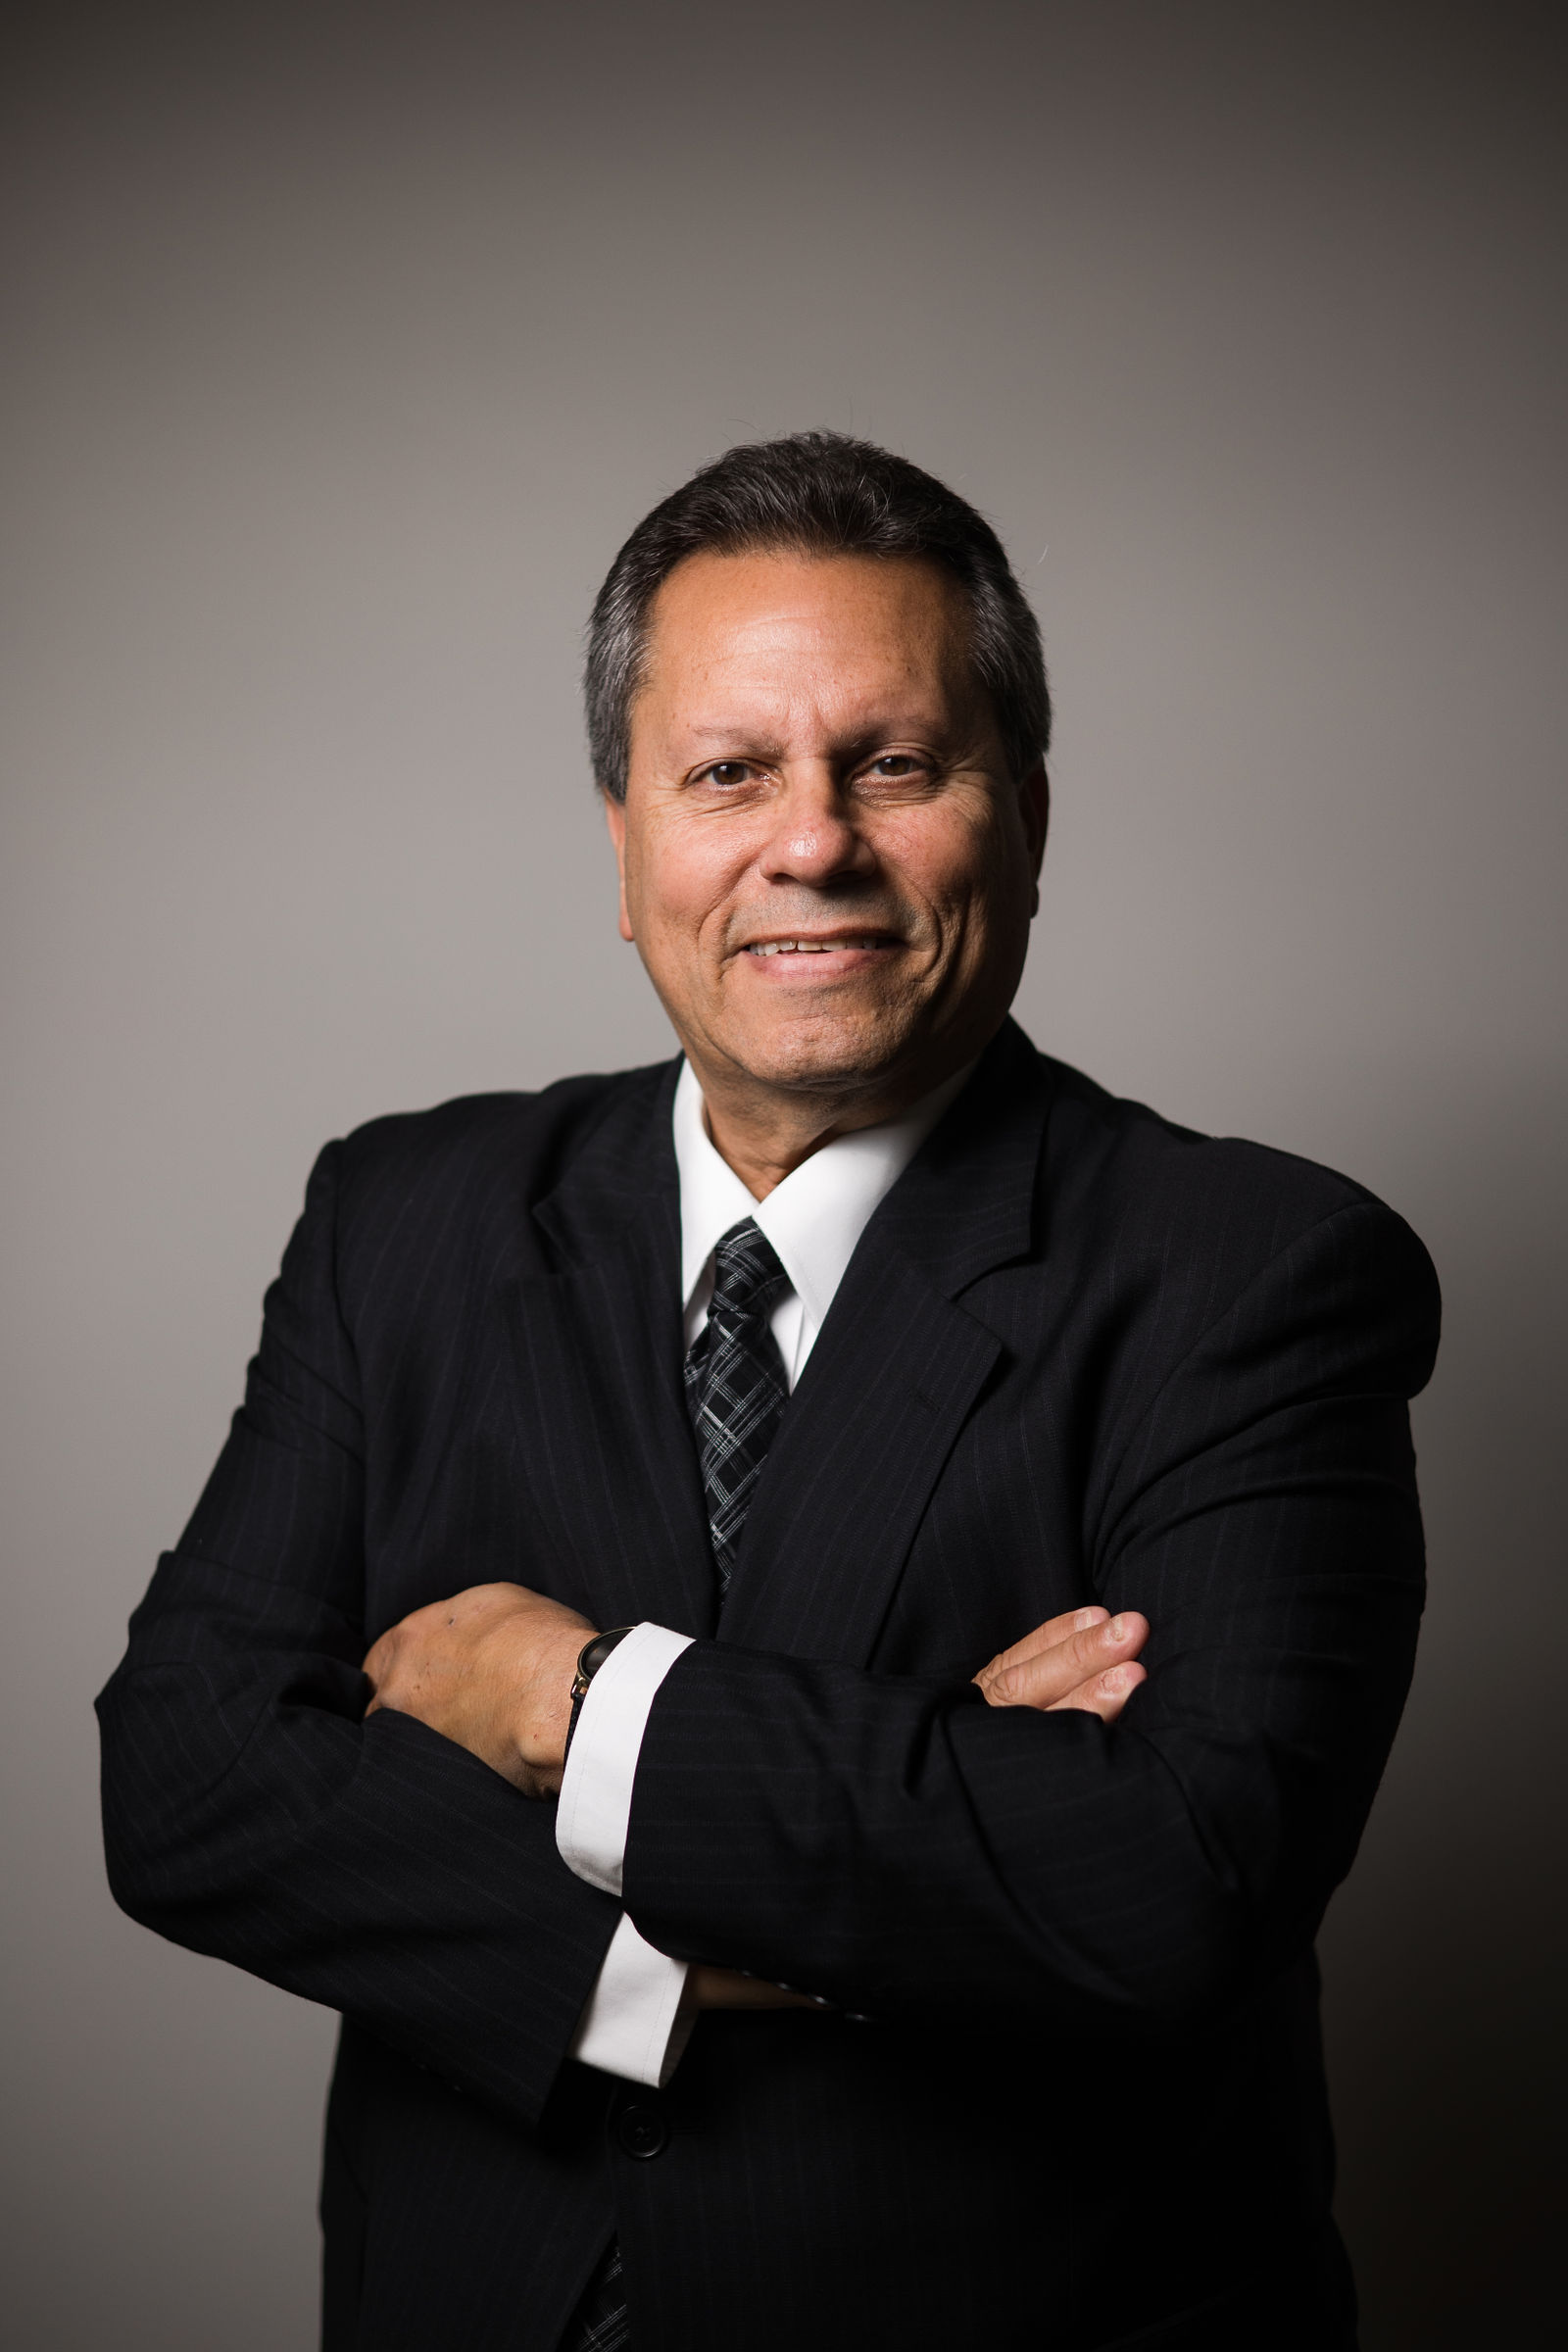 Gary Greico - Chairman of the Board, Chief Executive Officer